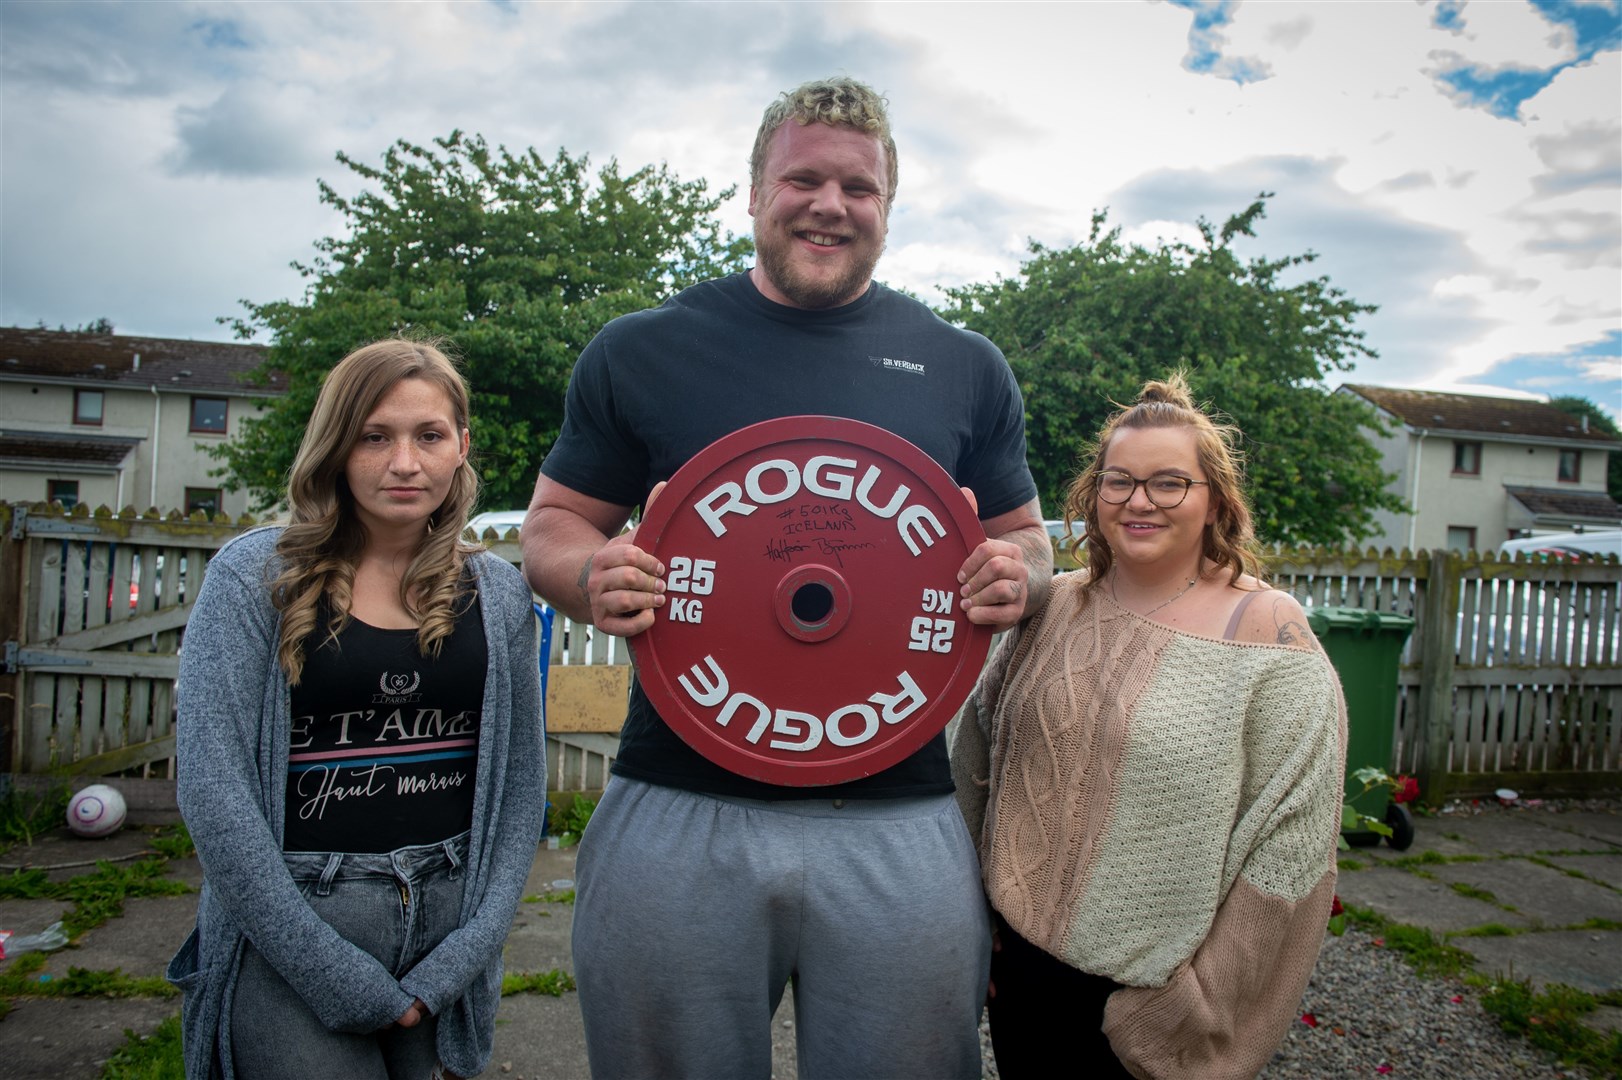 Tom Stoltman fundraising for his wife's sister Sandie Tulloch, who lost her son Maximus at eight months to cot death. Sandie Tulloch, Tom and Sinead Stoltman. Picture: Callum Mackay